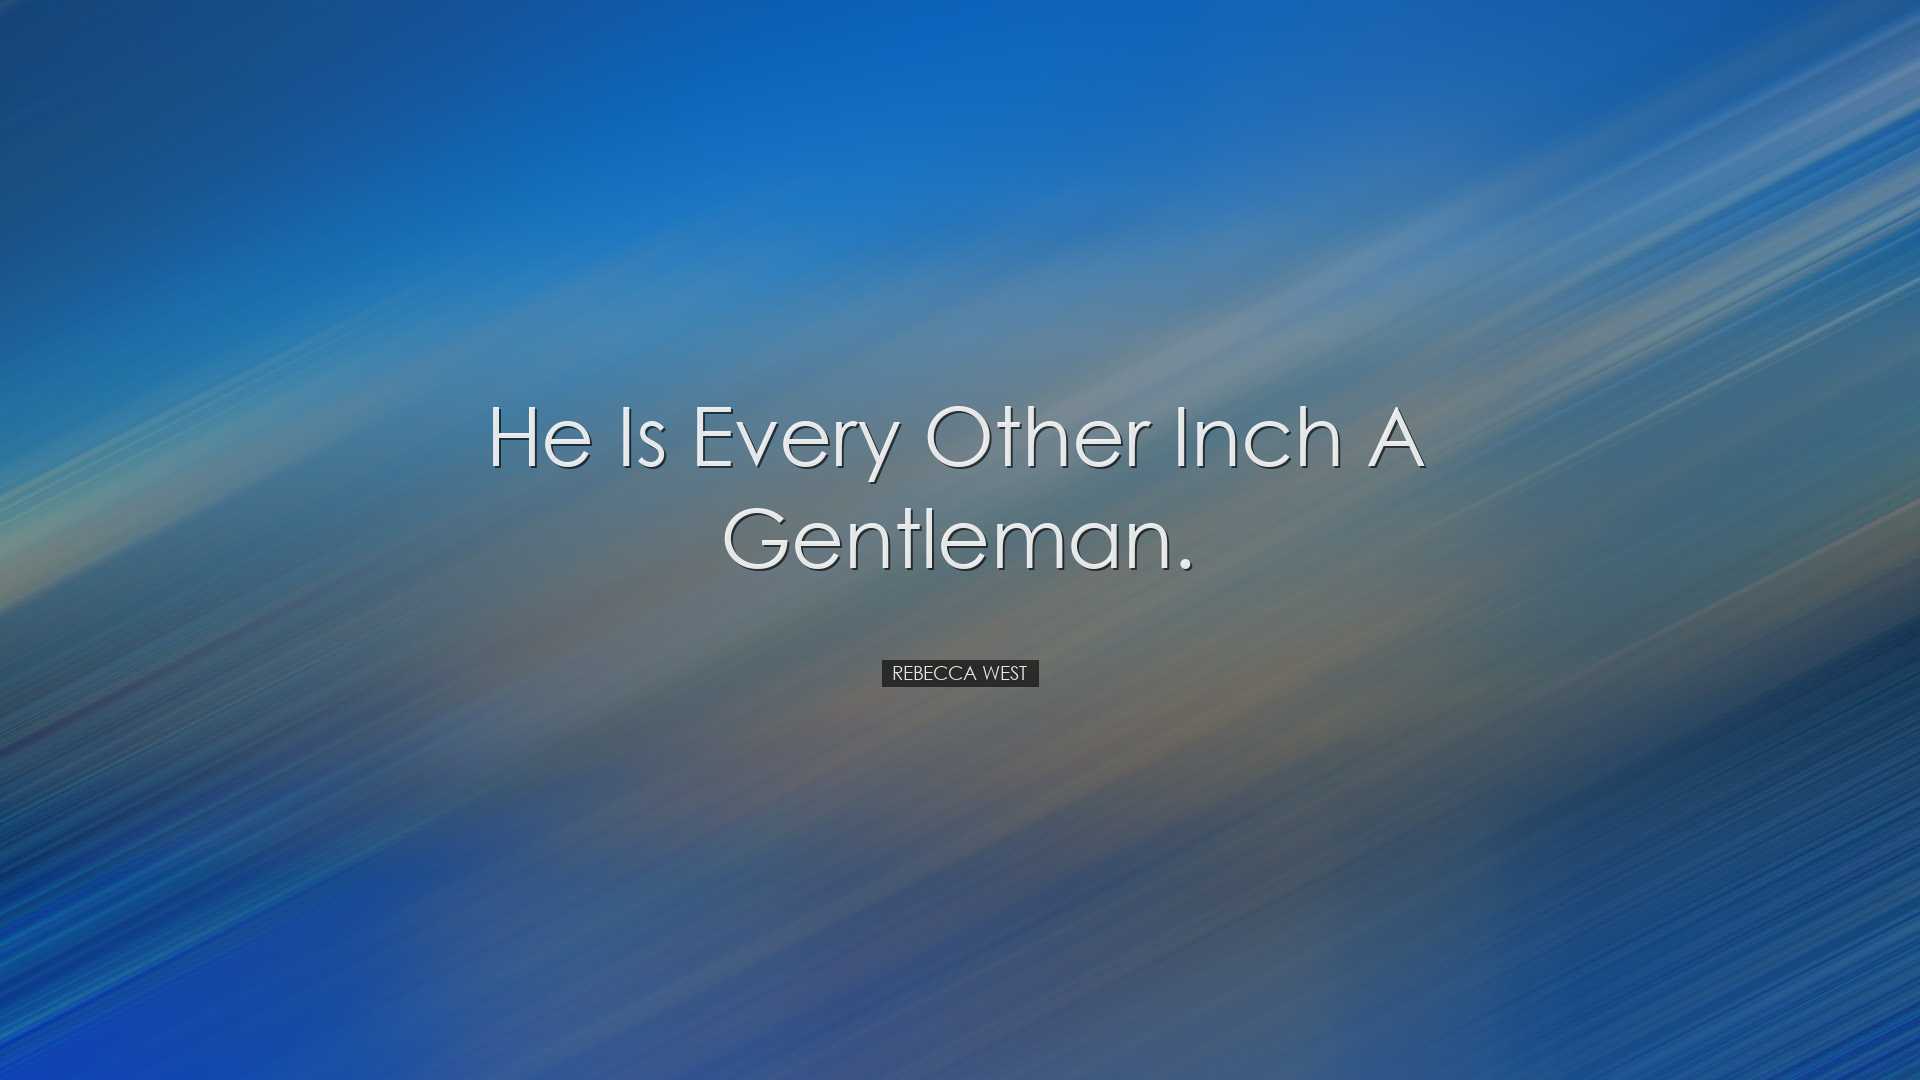 He is every other inch a gentleman. - Rebecca West